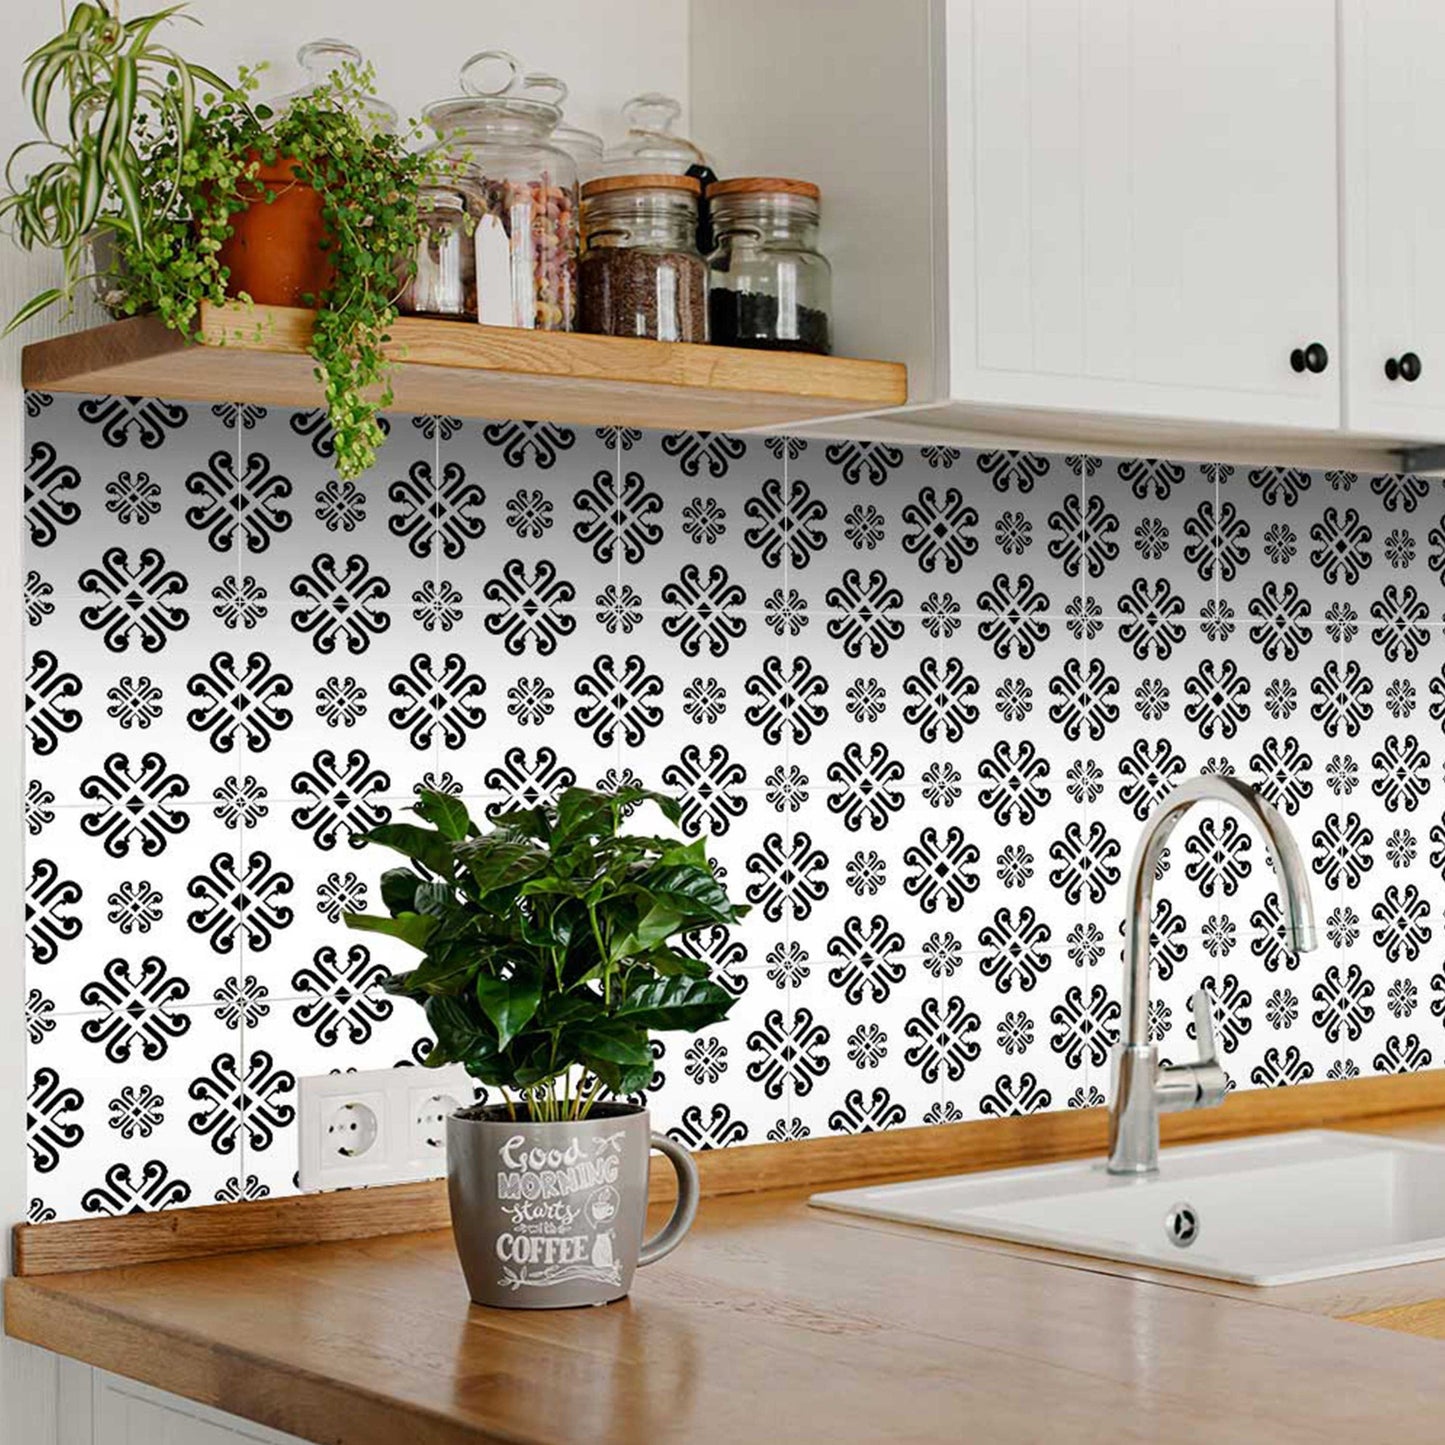 8" X 8" Black and White Daisy Peel and Stick Removable Tiles